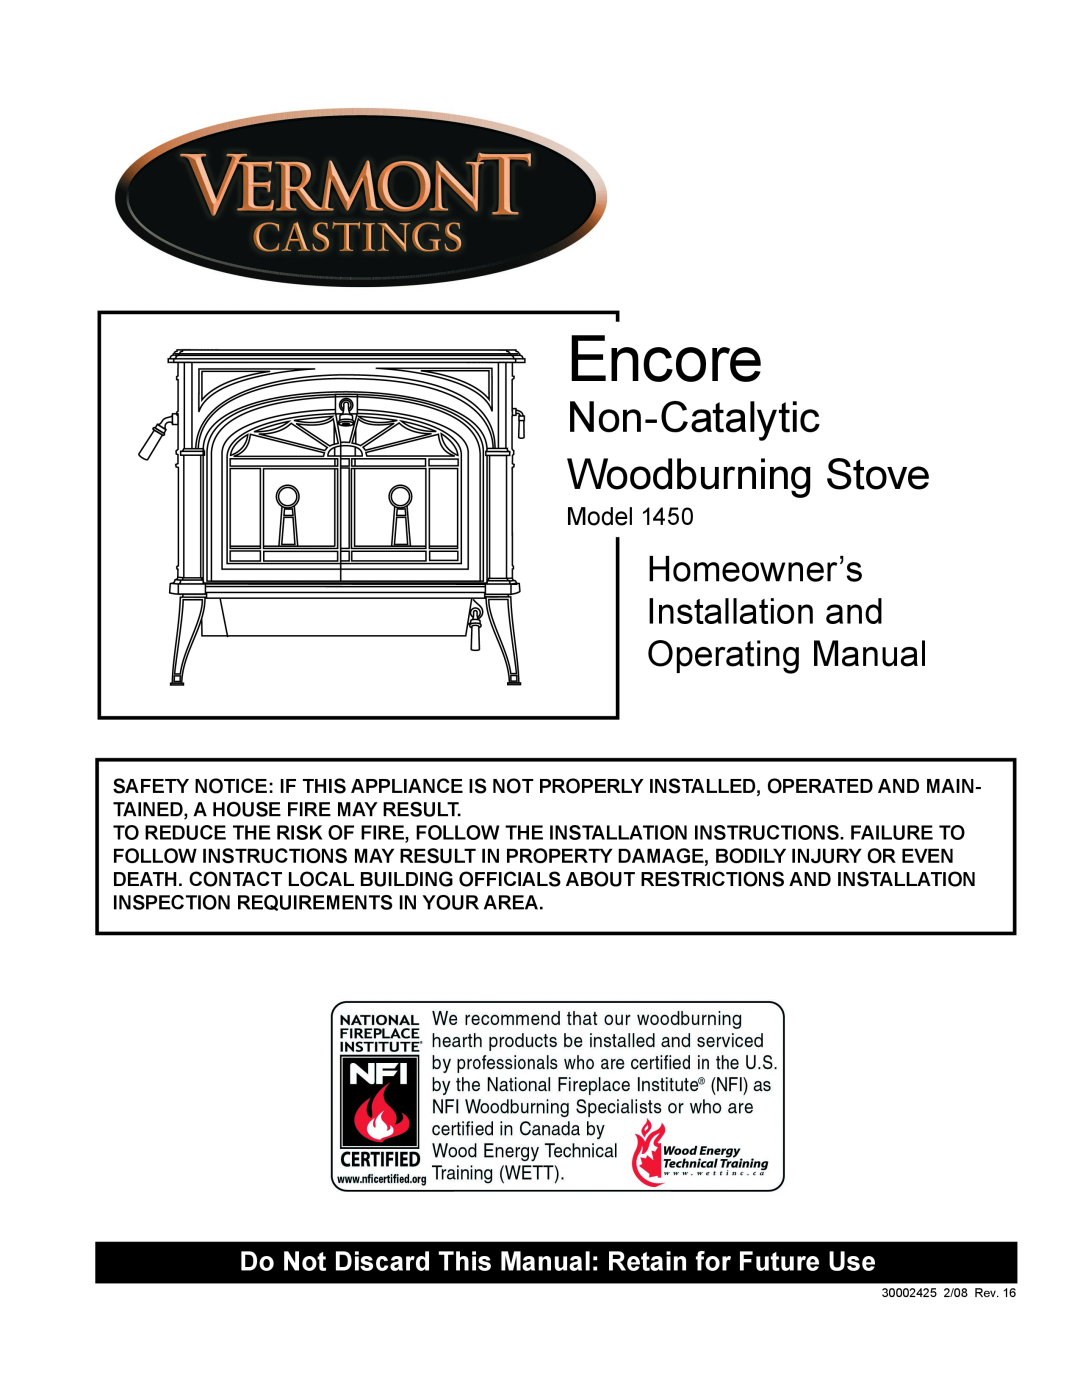 Vermont Casting Encore NC 1450 installation instructions Non-Catalytic Woodburning Stove, Model 